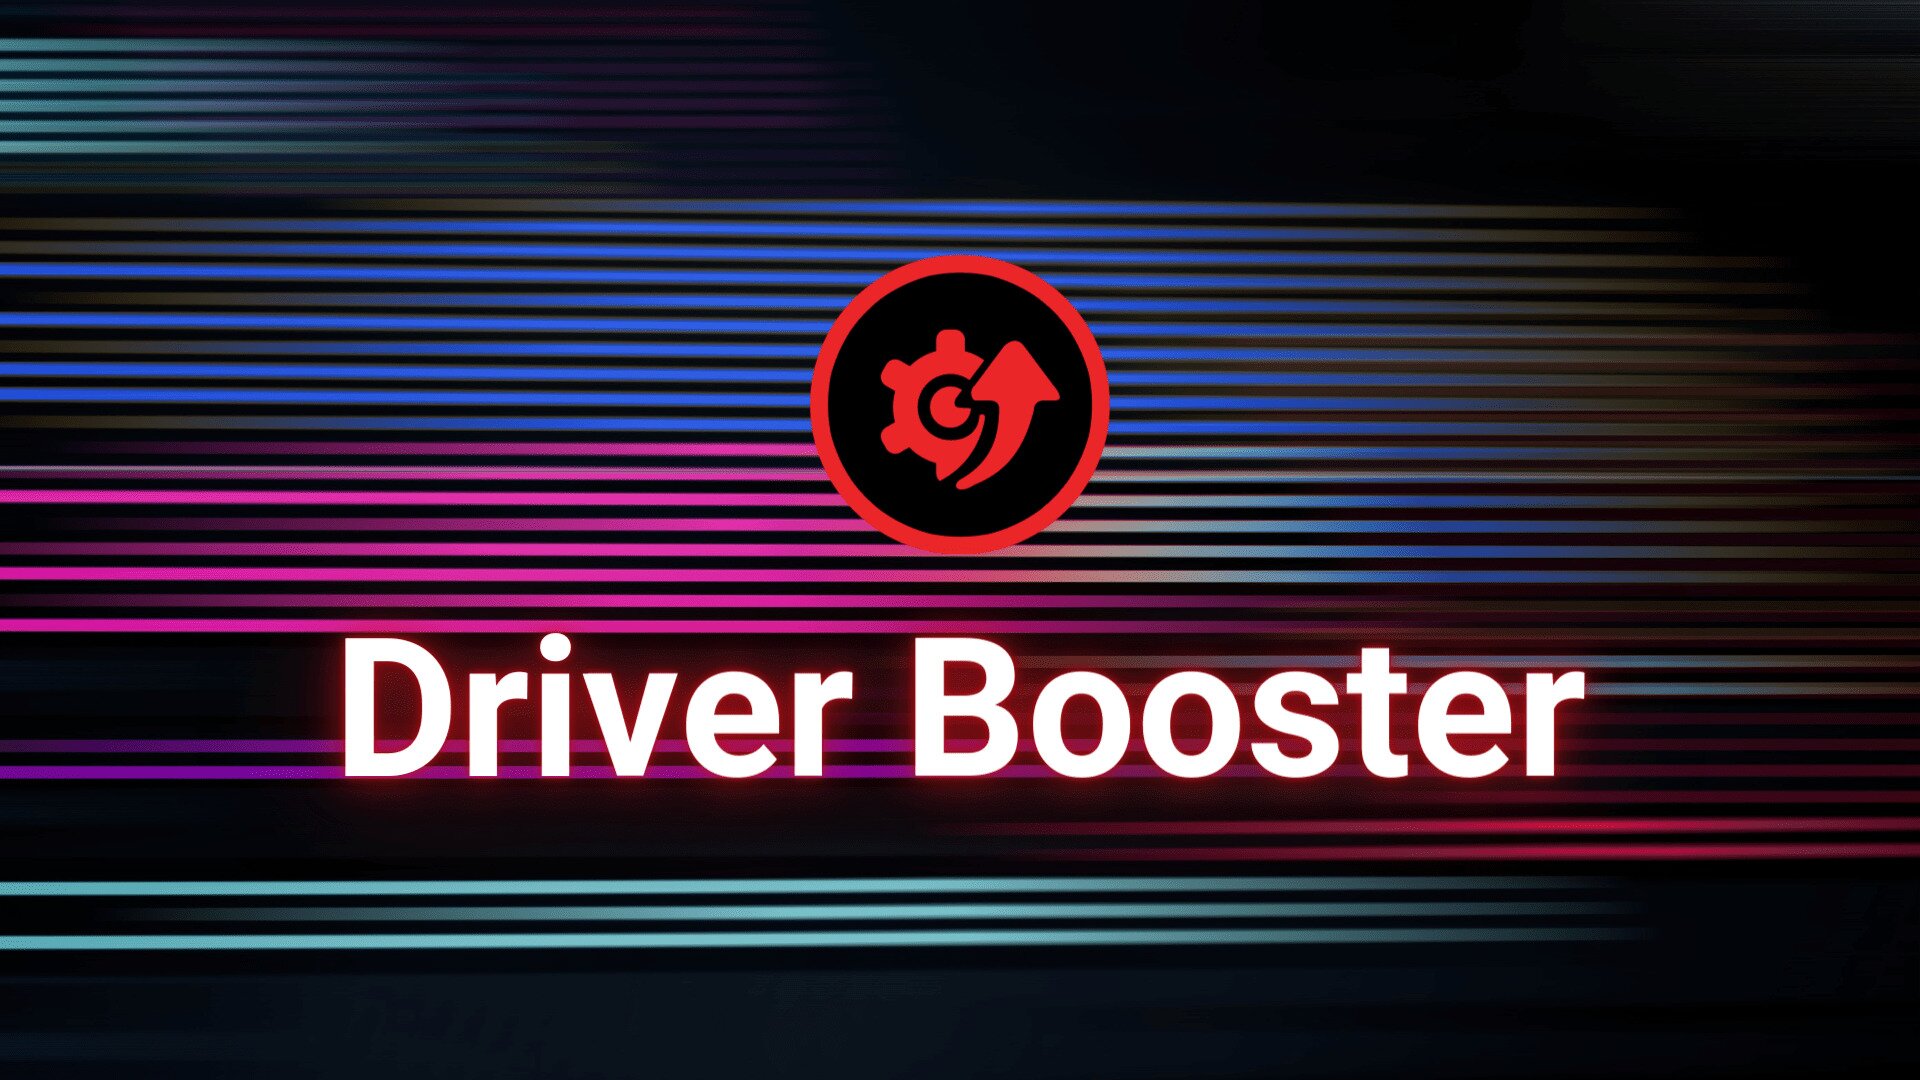 Driver Booster Download to Update Drivers Rapidly and Securely - IObit